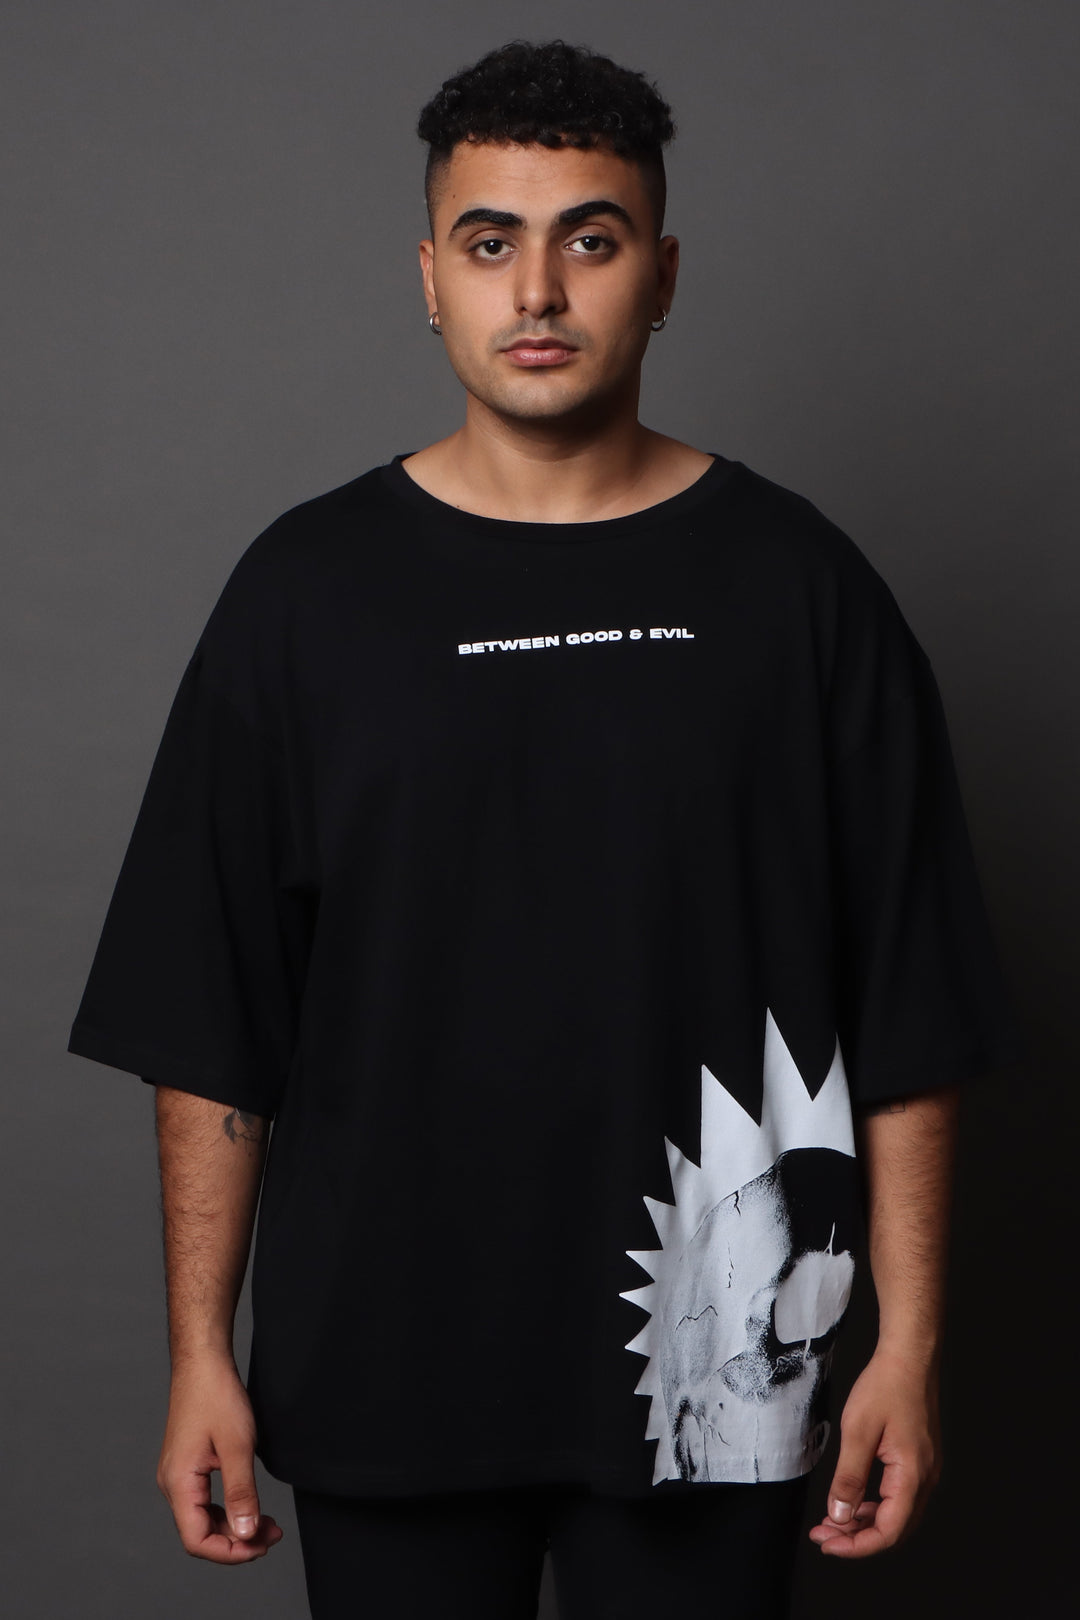 Printed Oversized Tee - MEN'S PRINTED OVER SIZE TEE#70